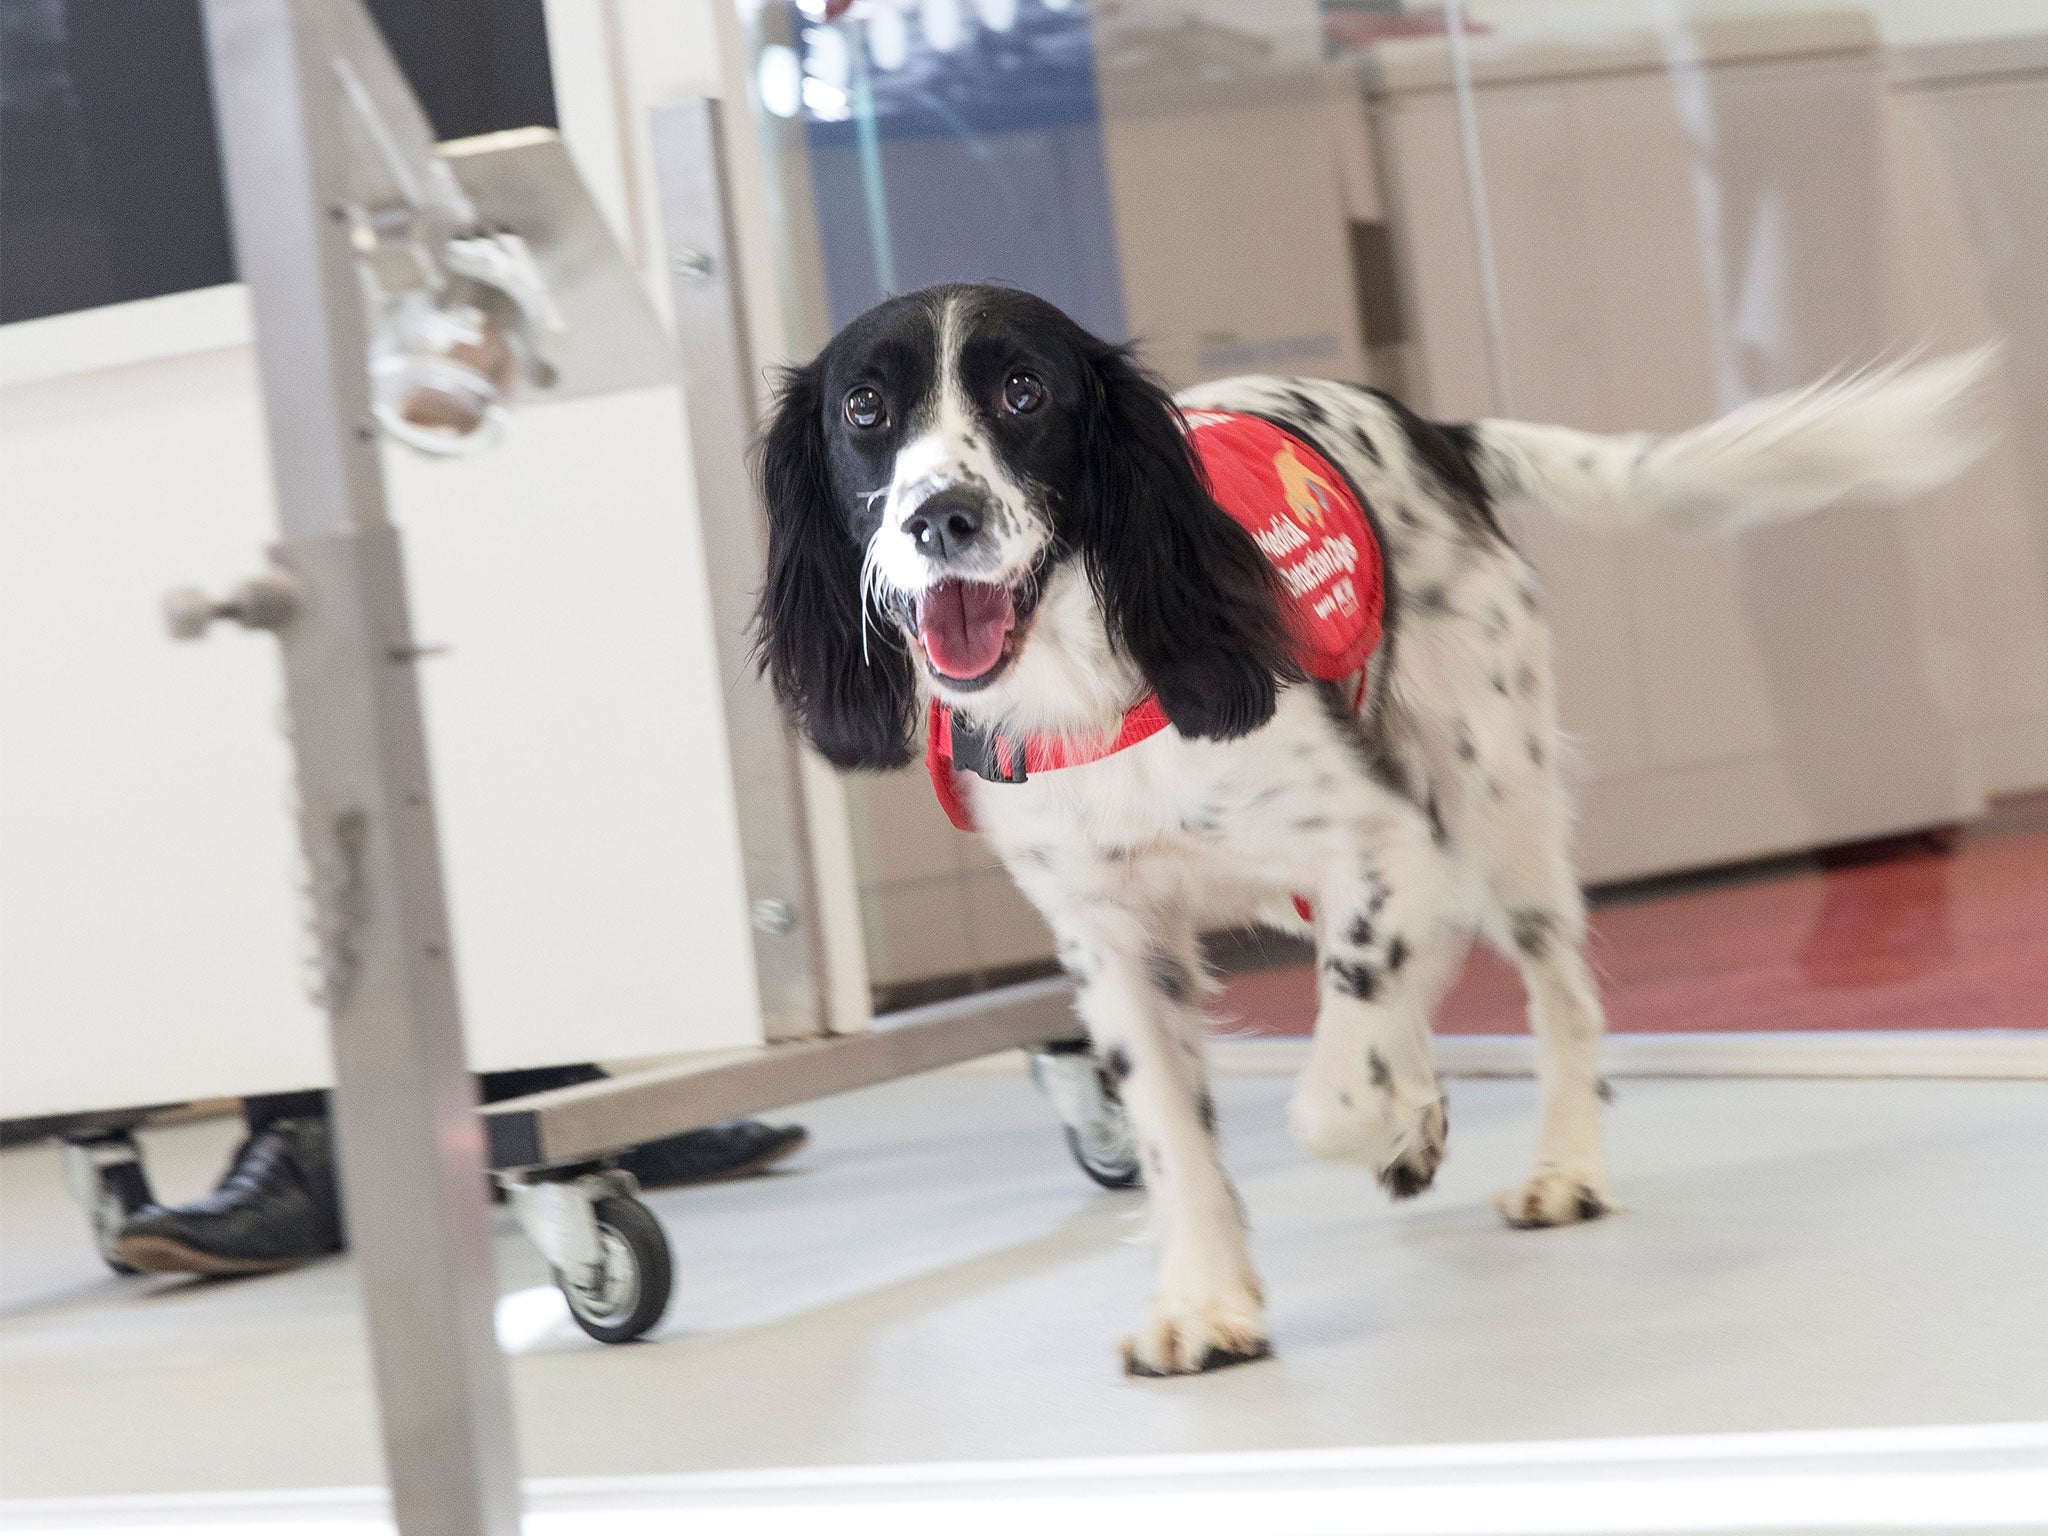 Springer spaniel Freya was able to be trained by scientists to identify children with malaria by smelling their socks